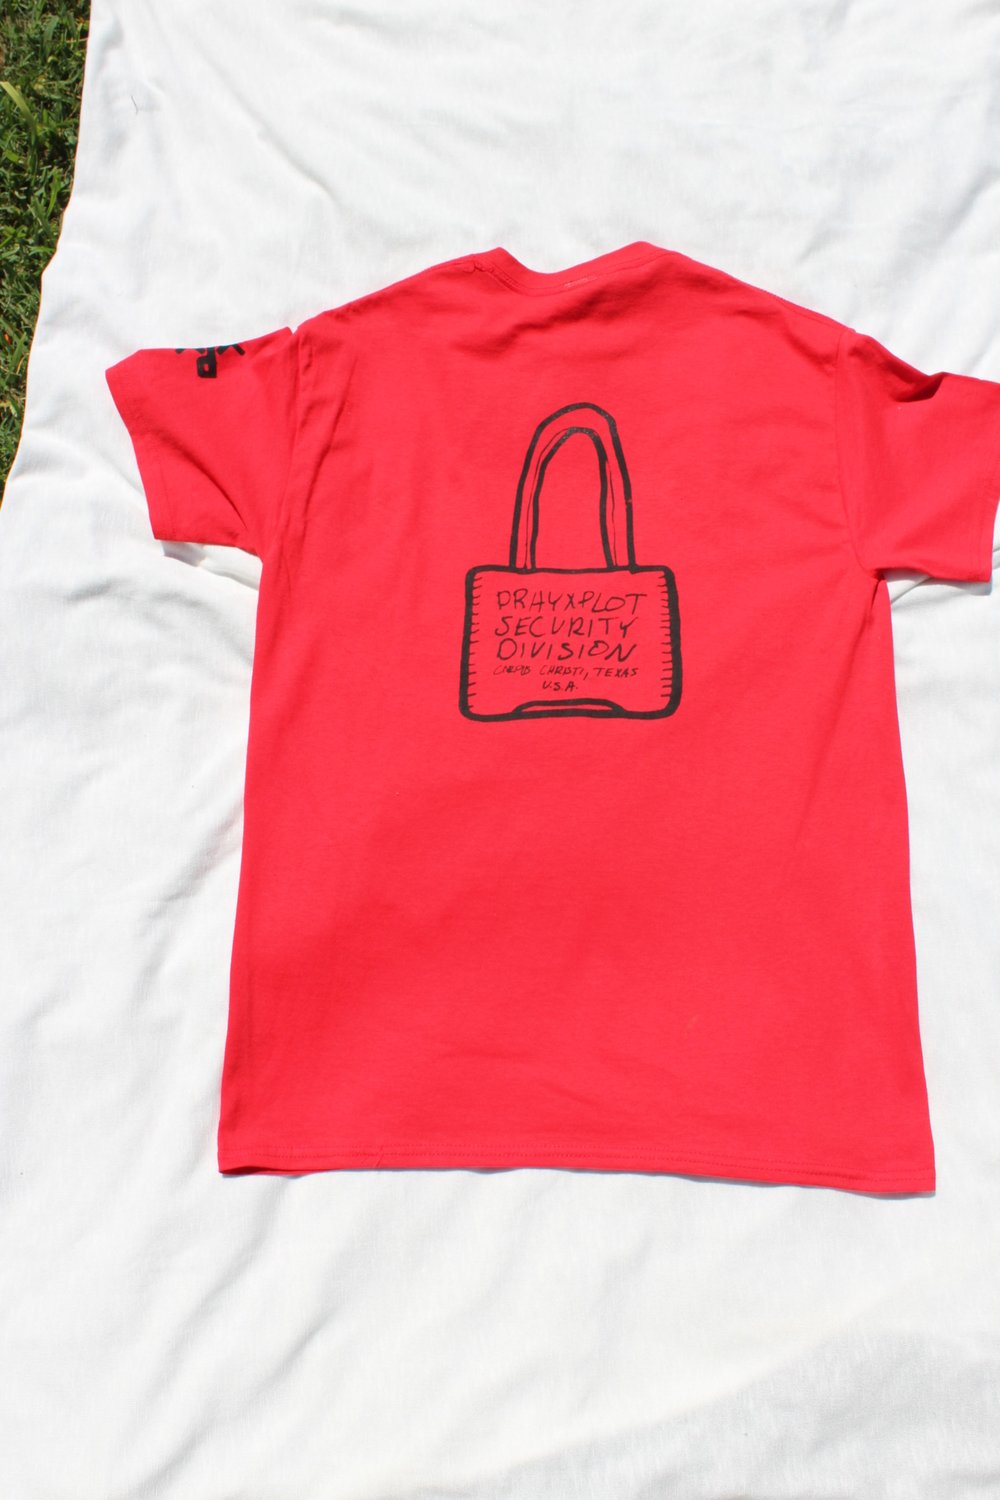 pxp security division tee in red 